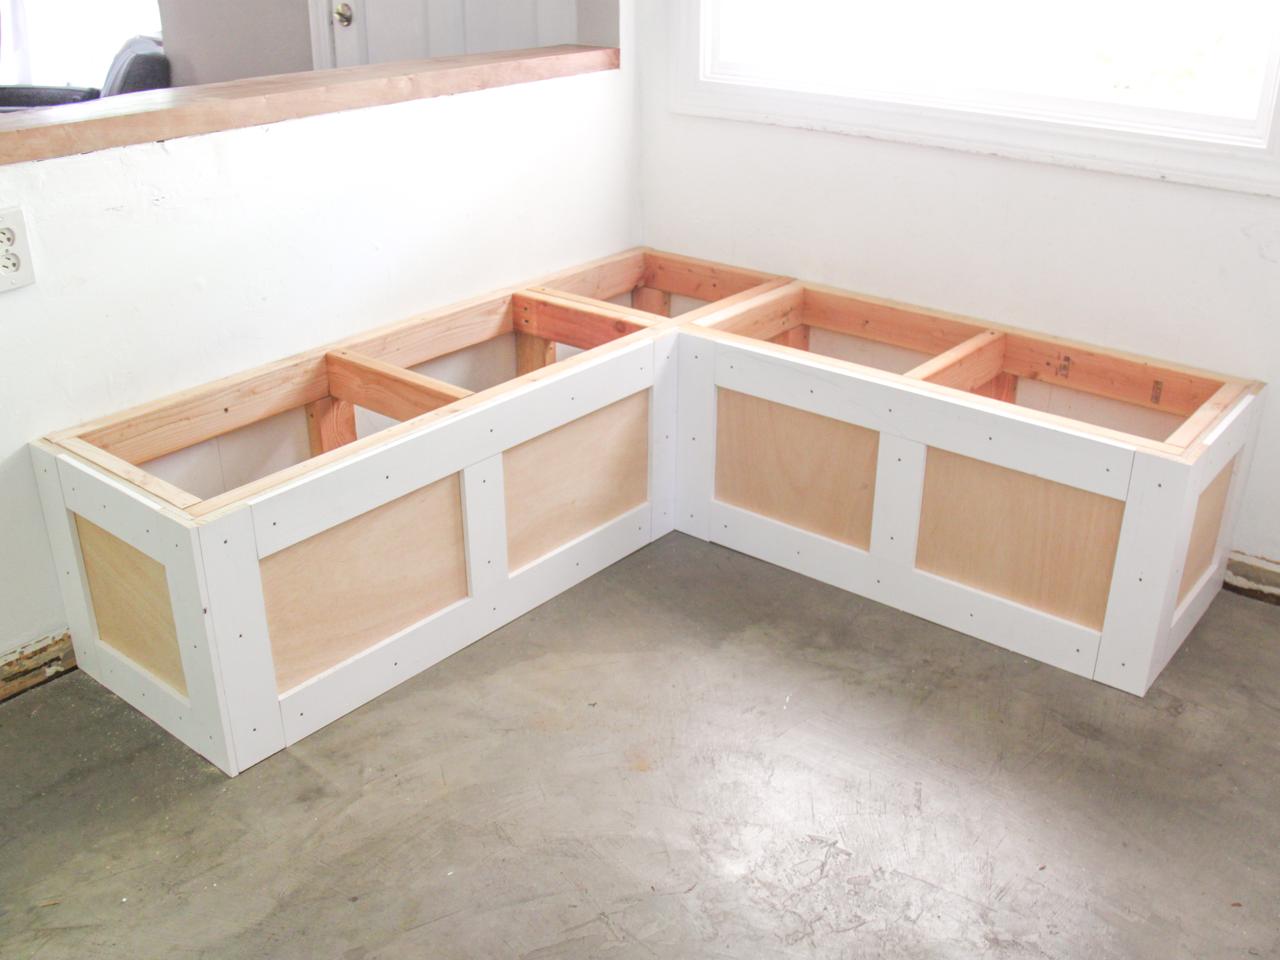 How To Build A Banquette Seat With Built In Storage - Bench Seat With Storage Plans